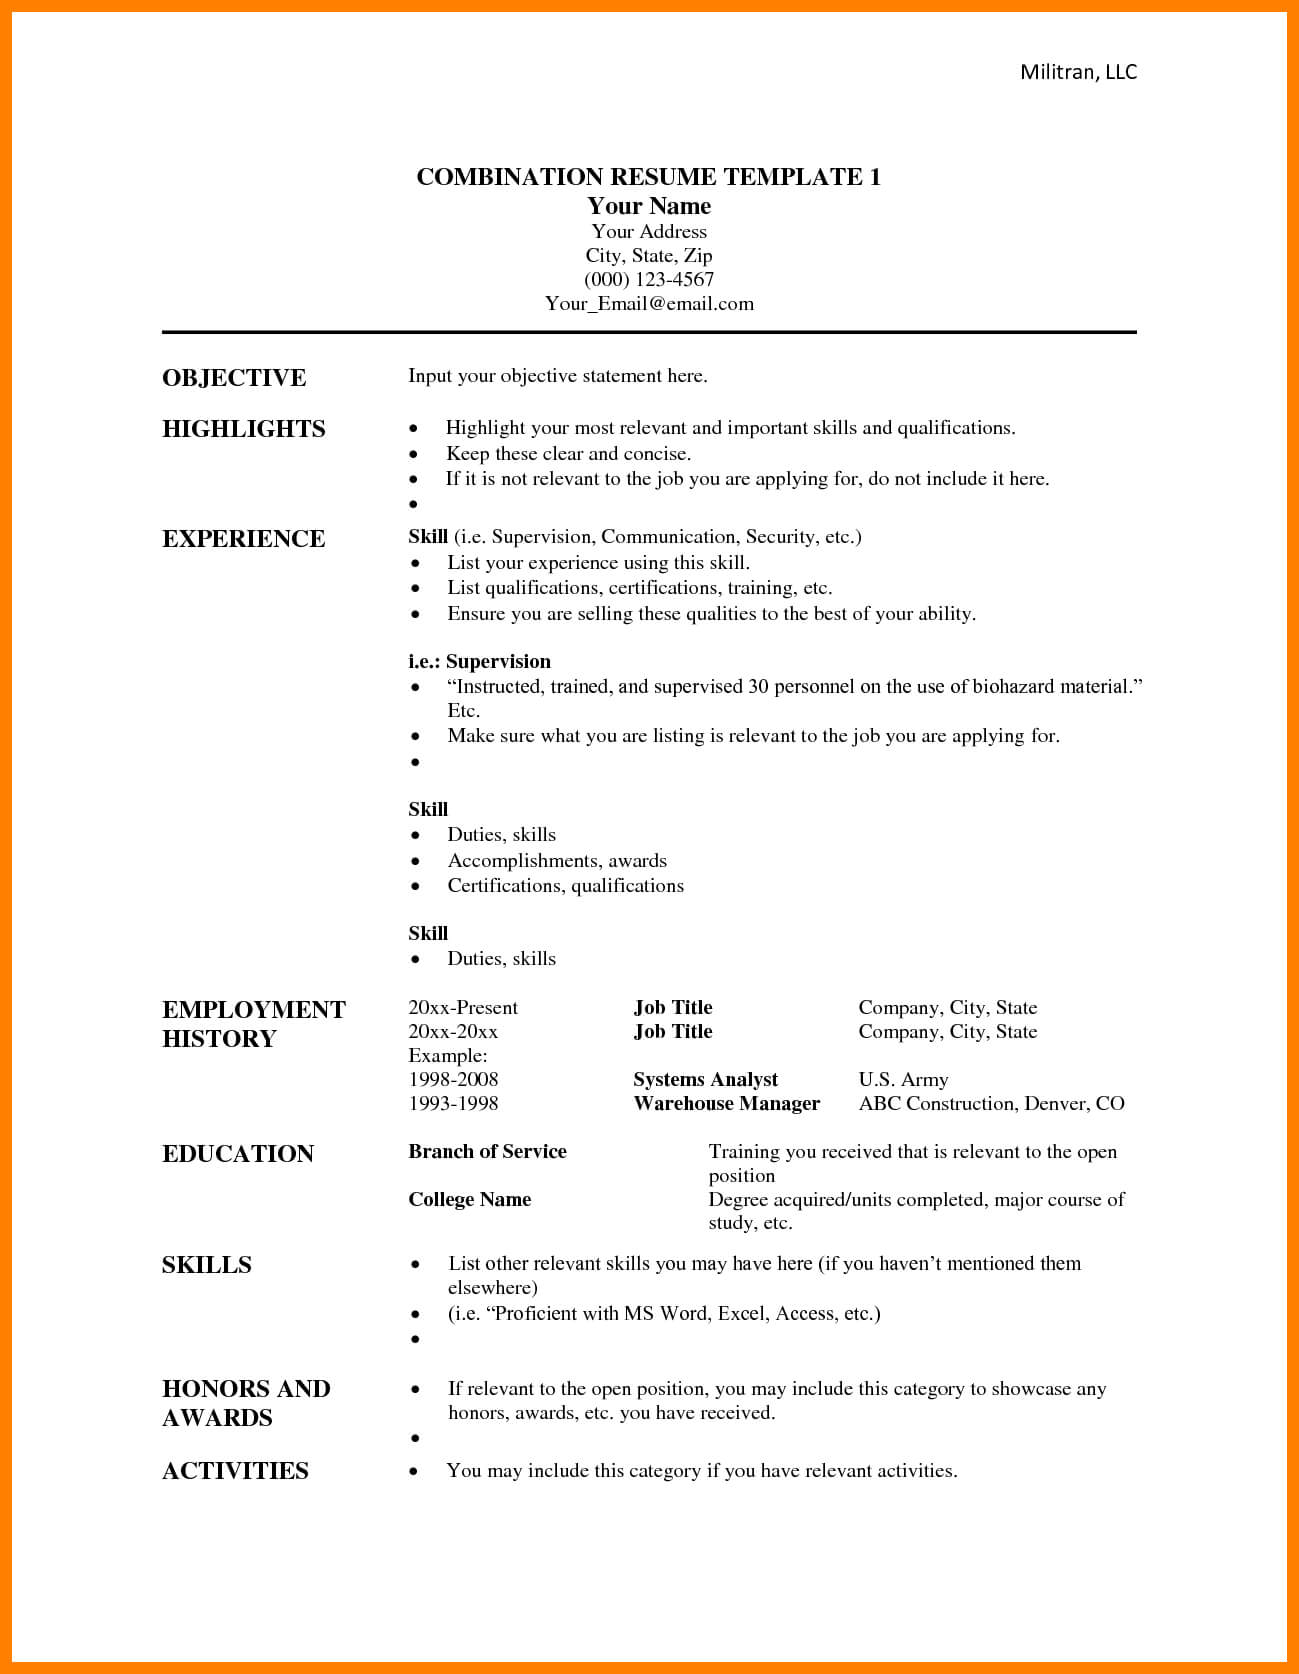 001 Functional Resume Template Microsoft Word Best With Combination Resume Template Word